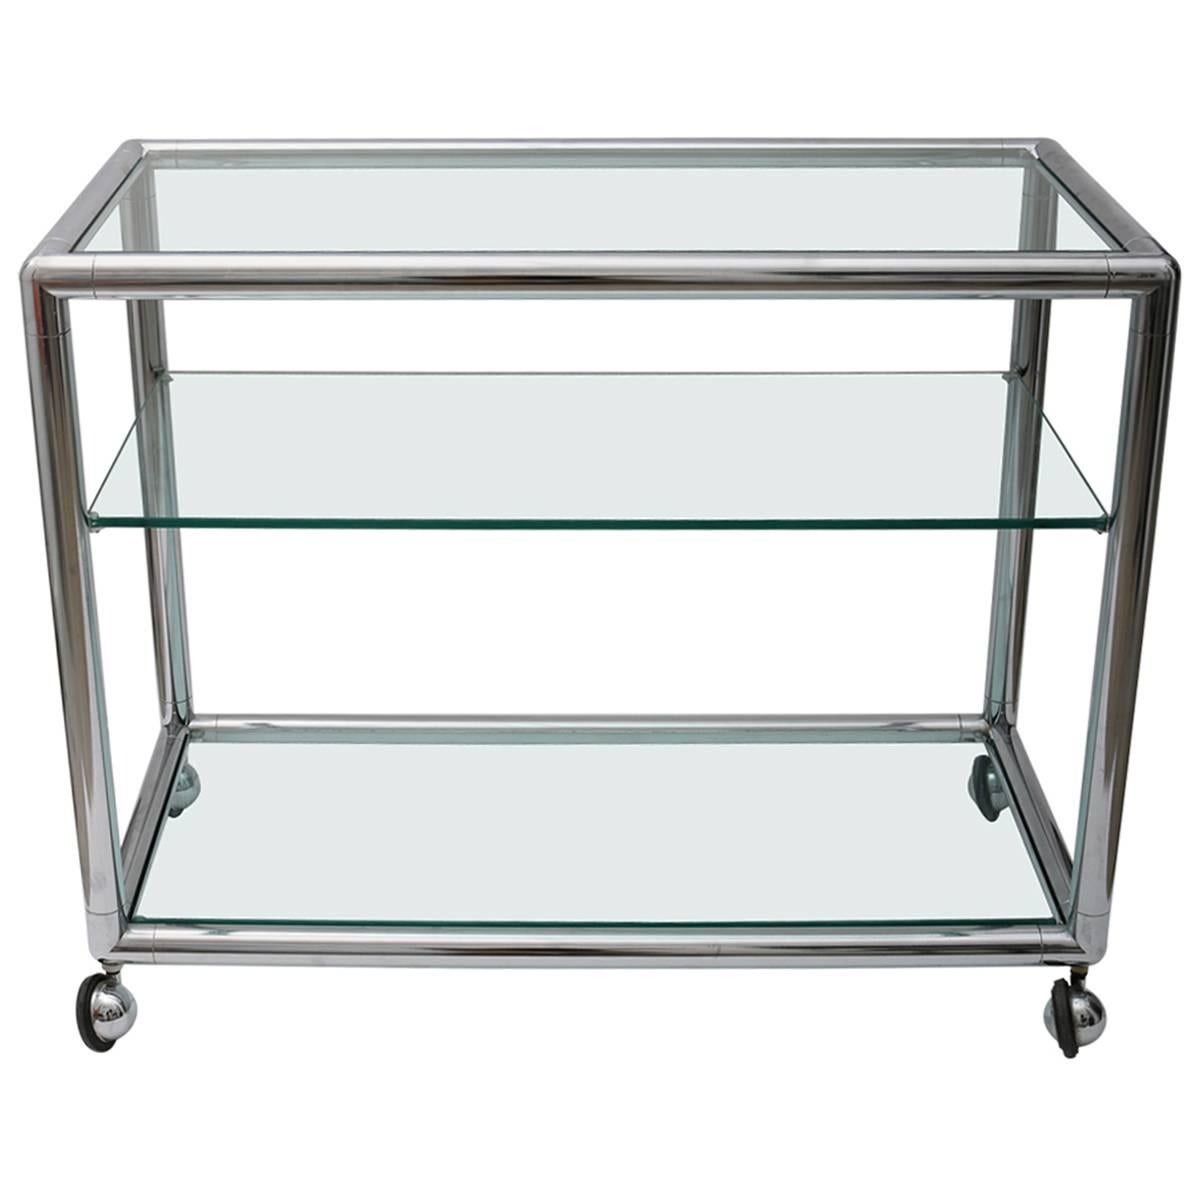 Three-Tiered Polished Chrome and Glass Bar Cart, Attributed to Pace Furniture